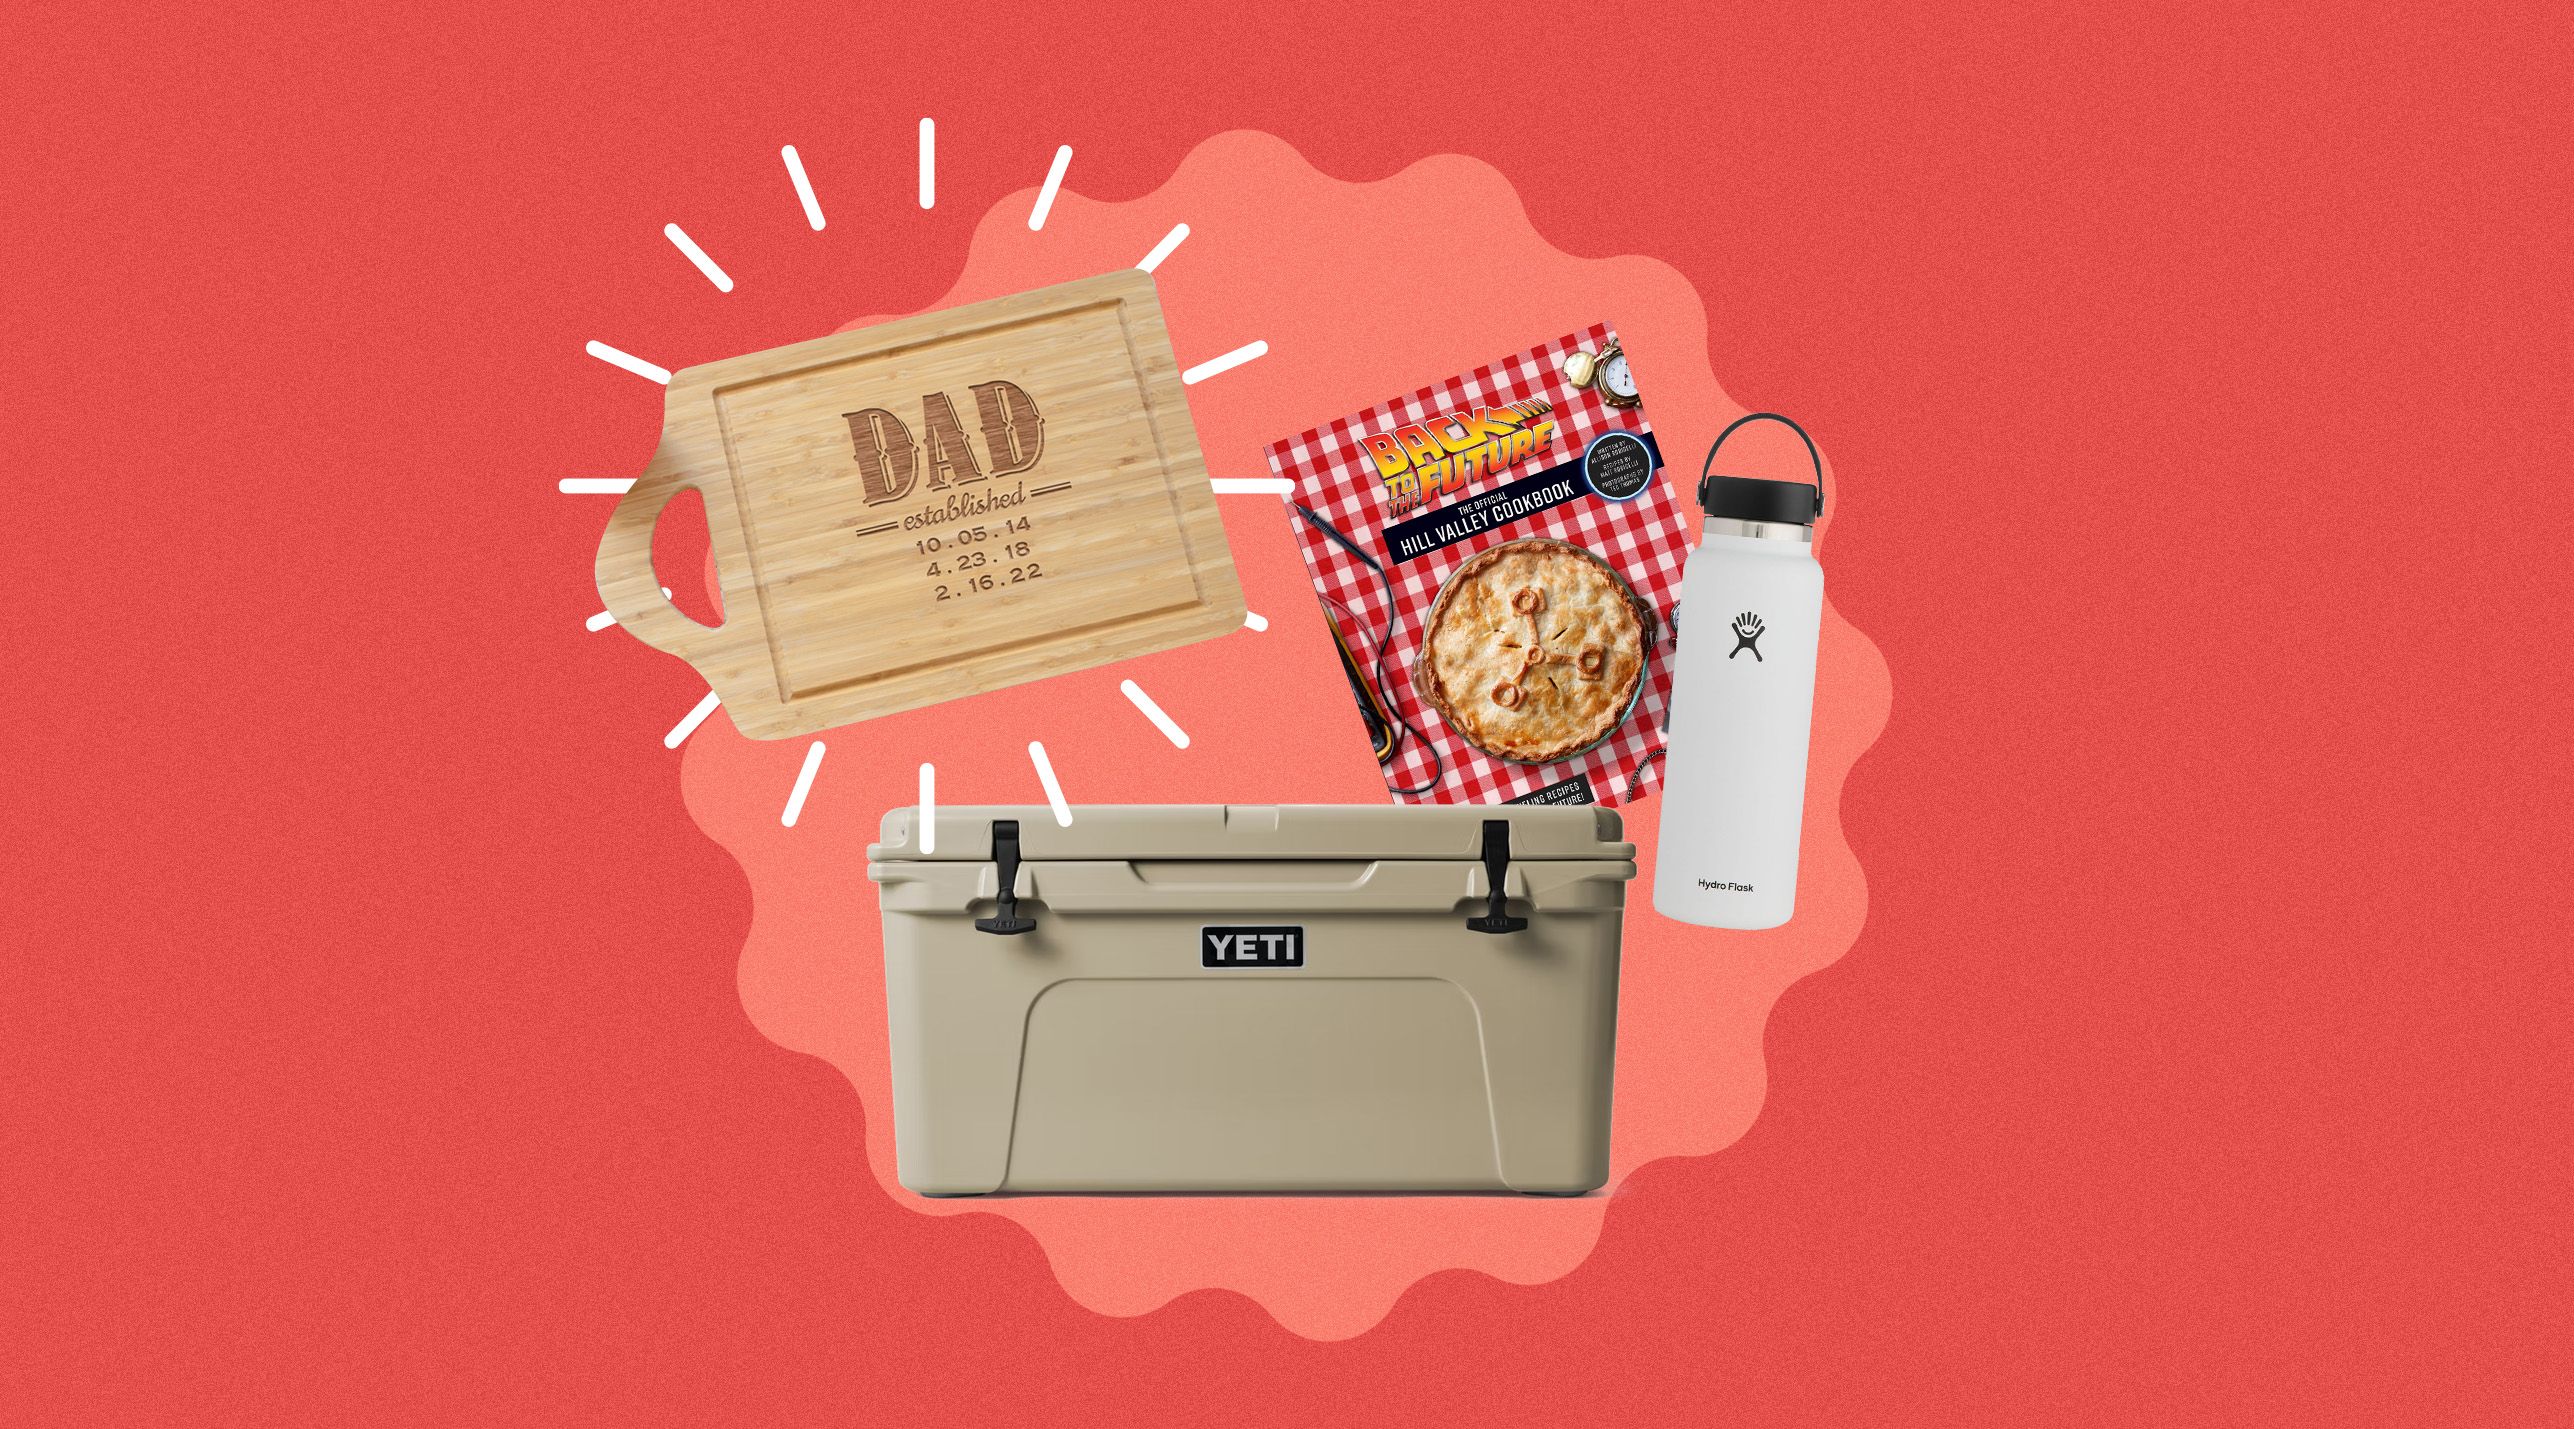 12 Father's Day Food Deals Of 2022 - Restaurant Discounts